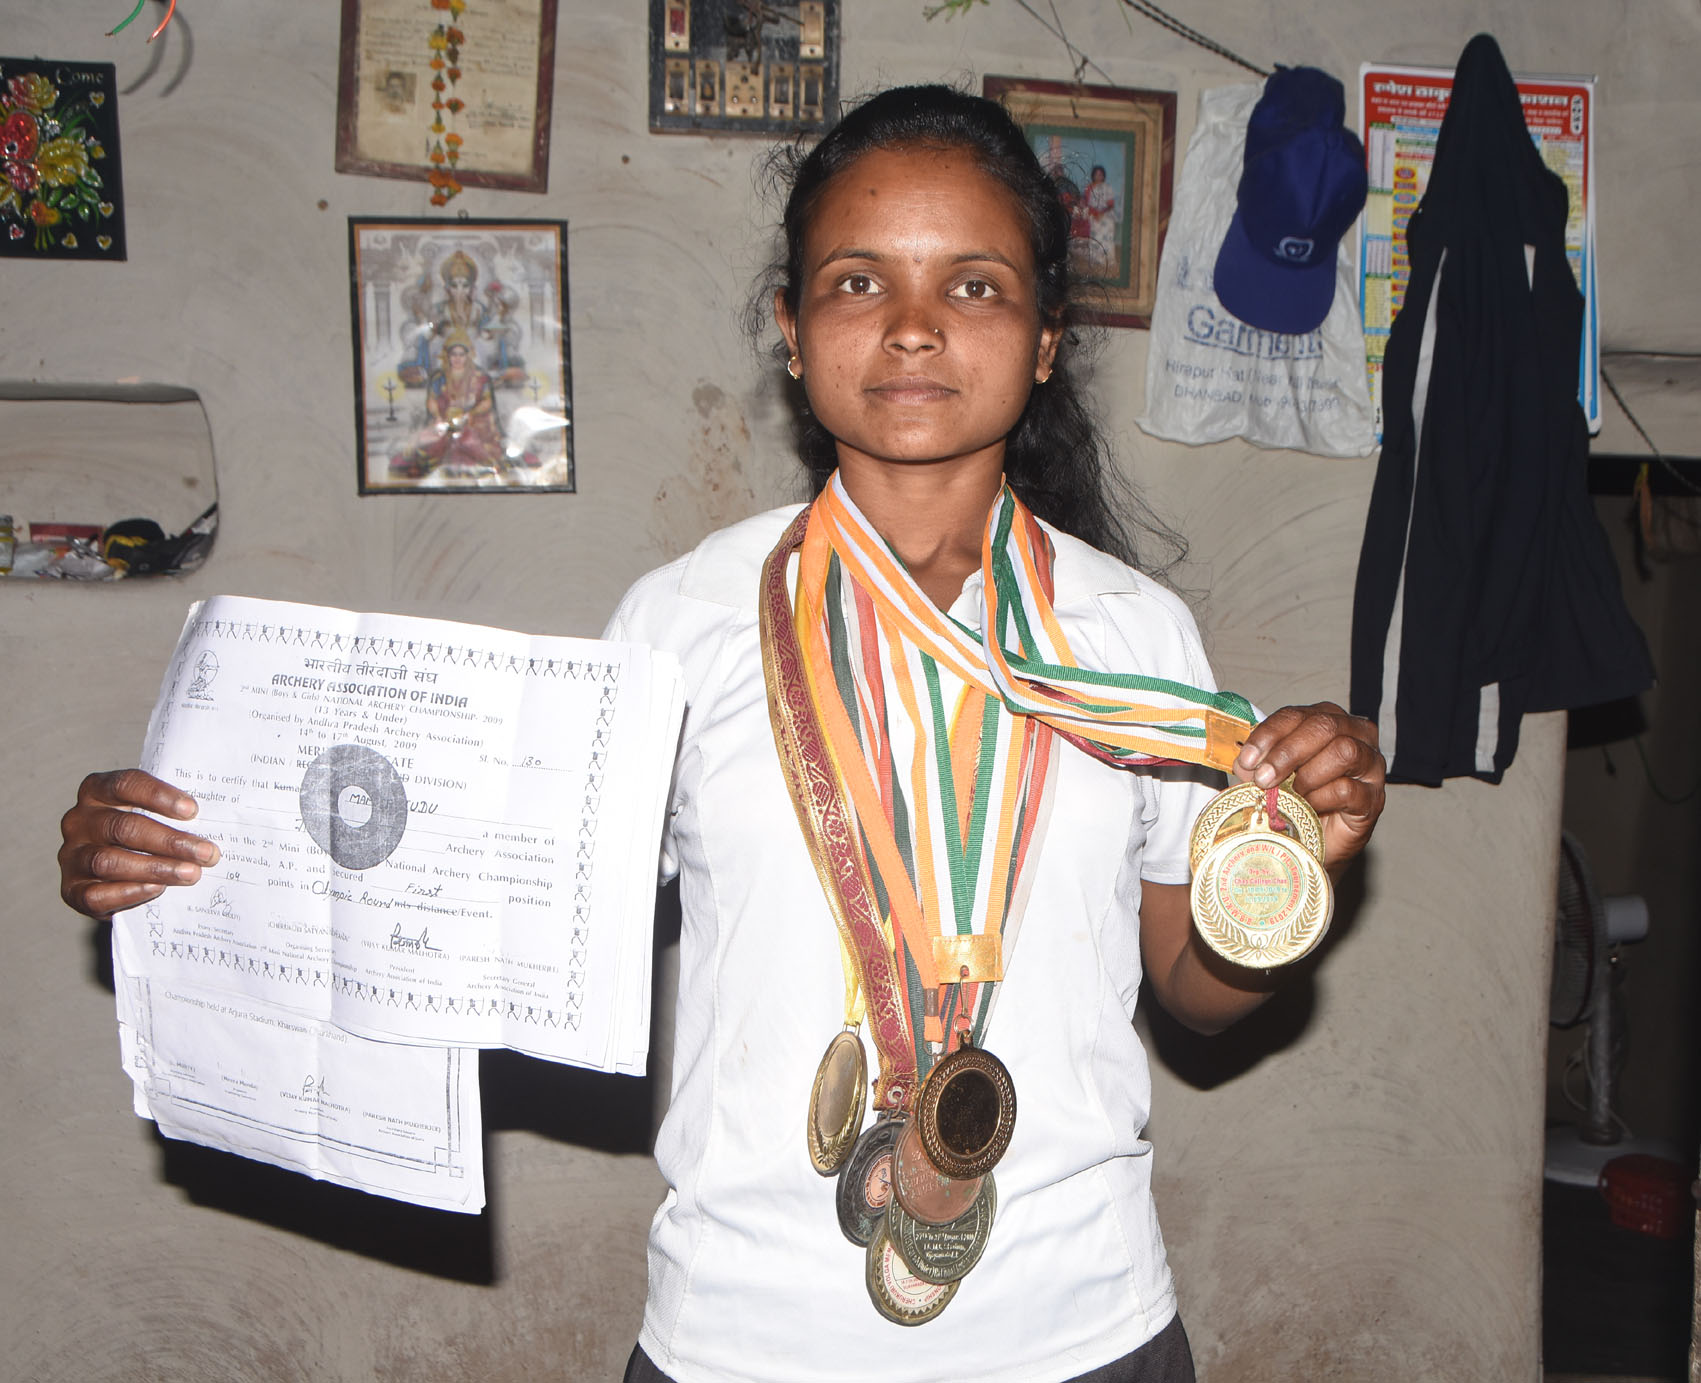 Mamta Tuddu with her medals and certificates.